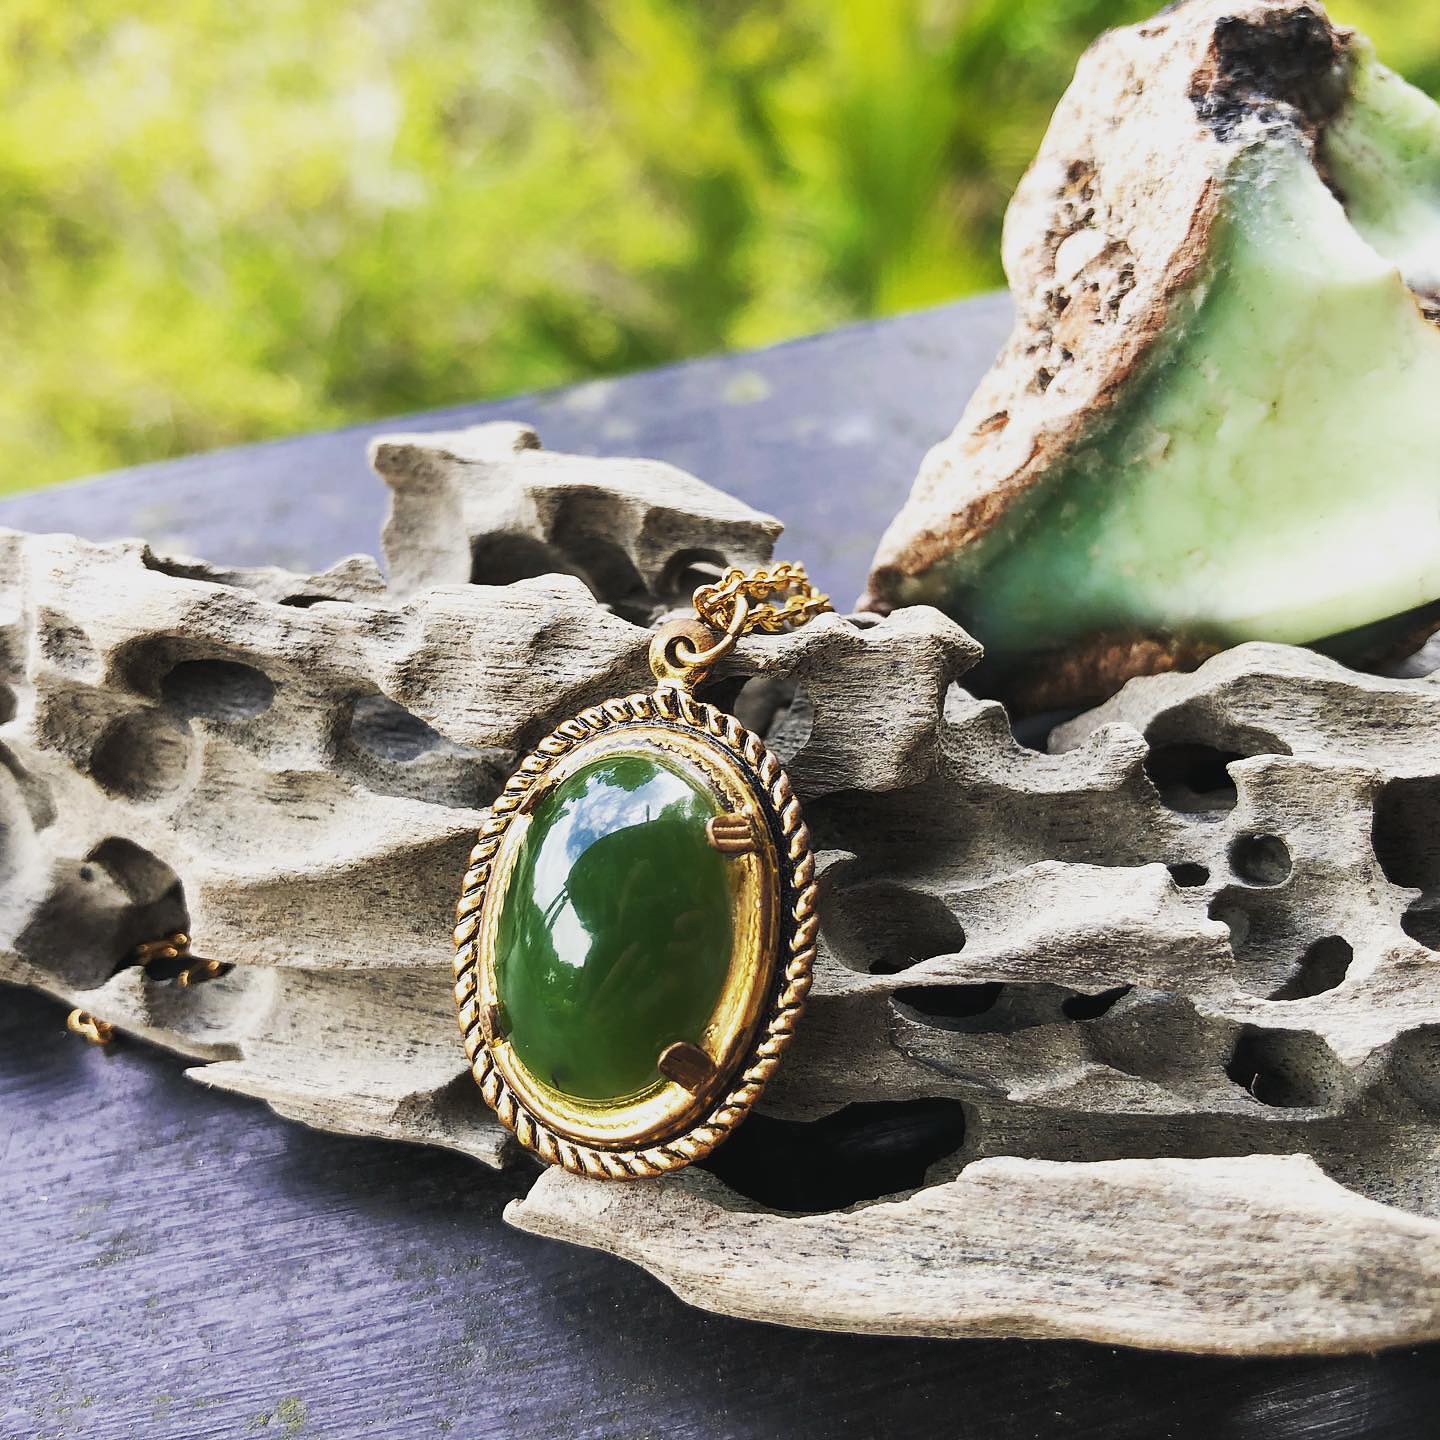 Necklace with bright green New Zealand Pounamu (nephrite jade) hand polished to an 18x13mm cabochon with a bright, glassy polish, and set in a gold plated setting with 19 inch chain, angled